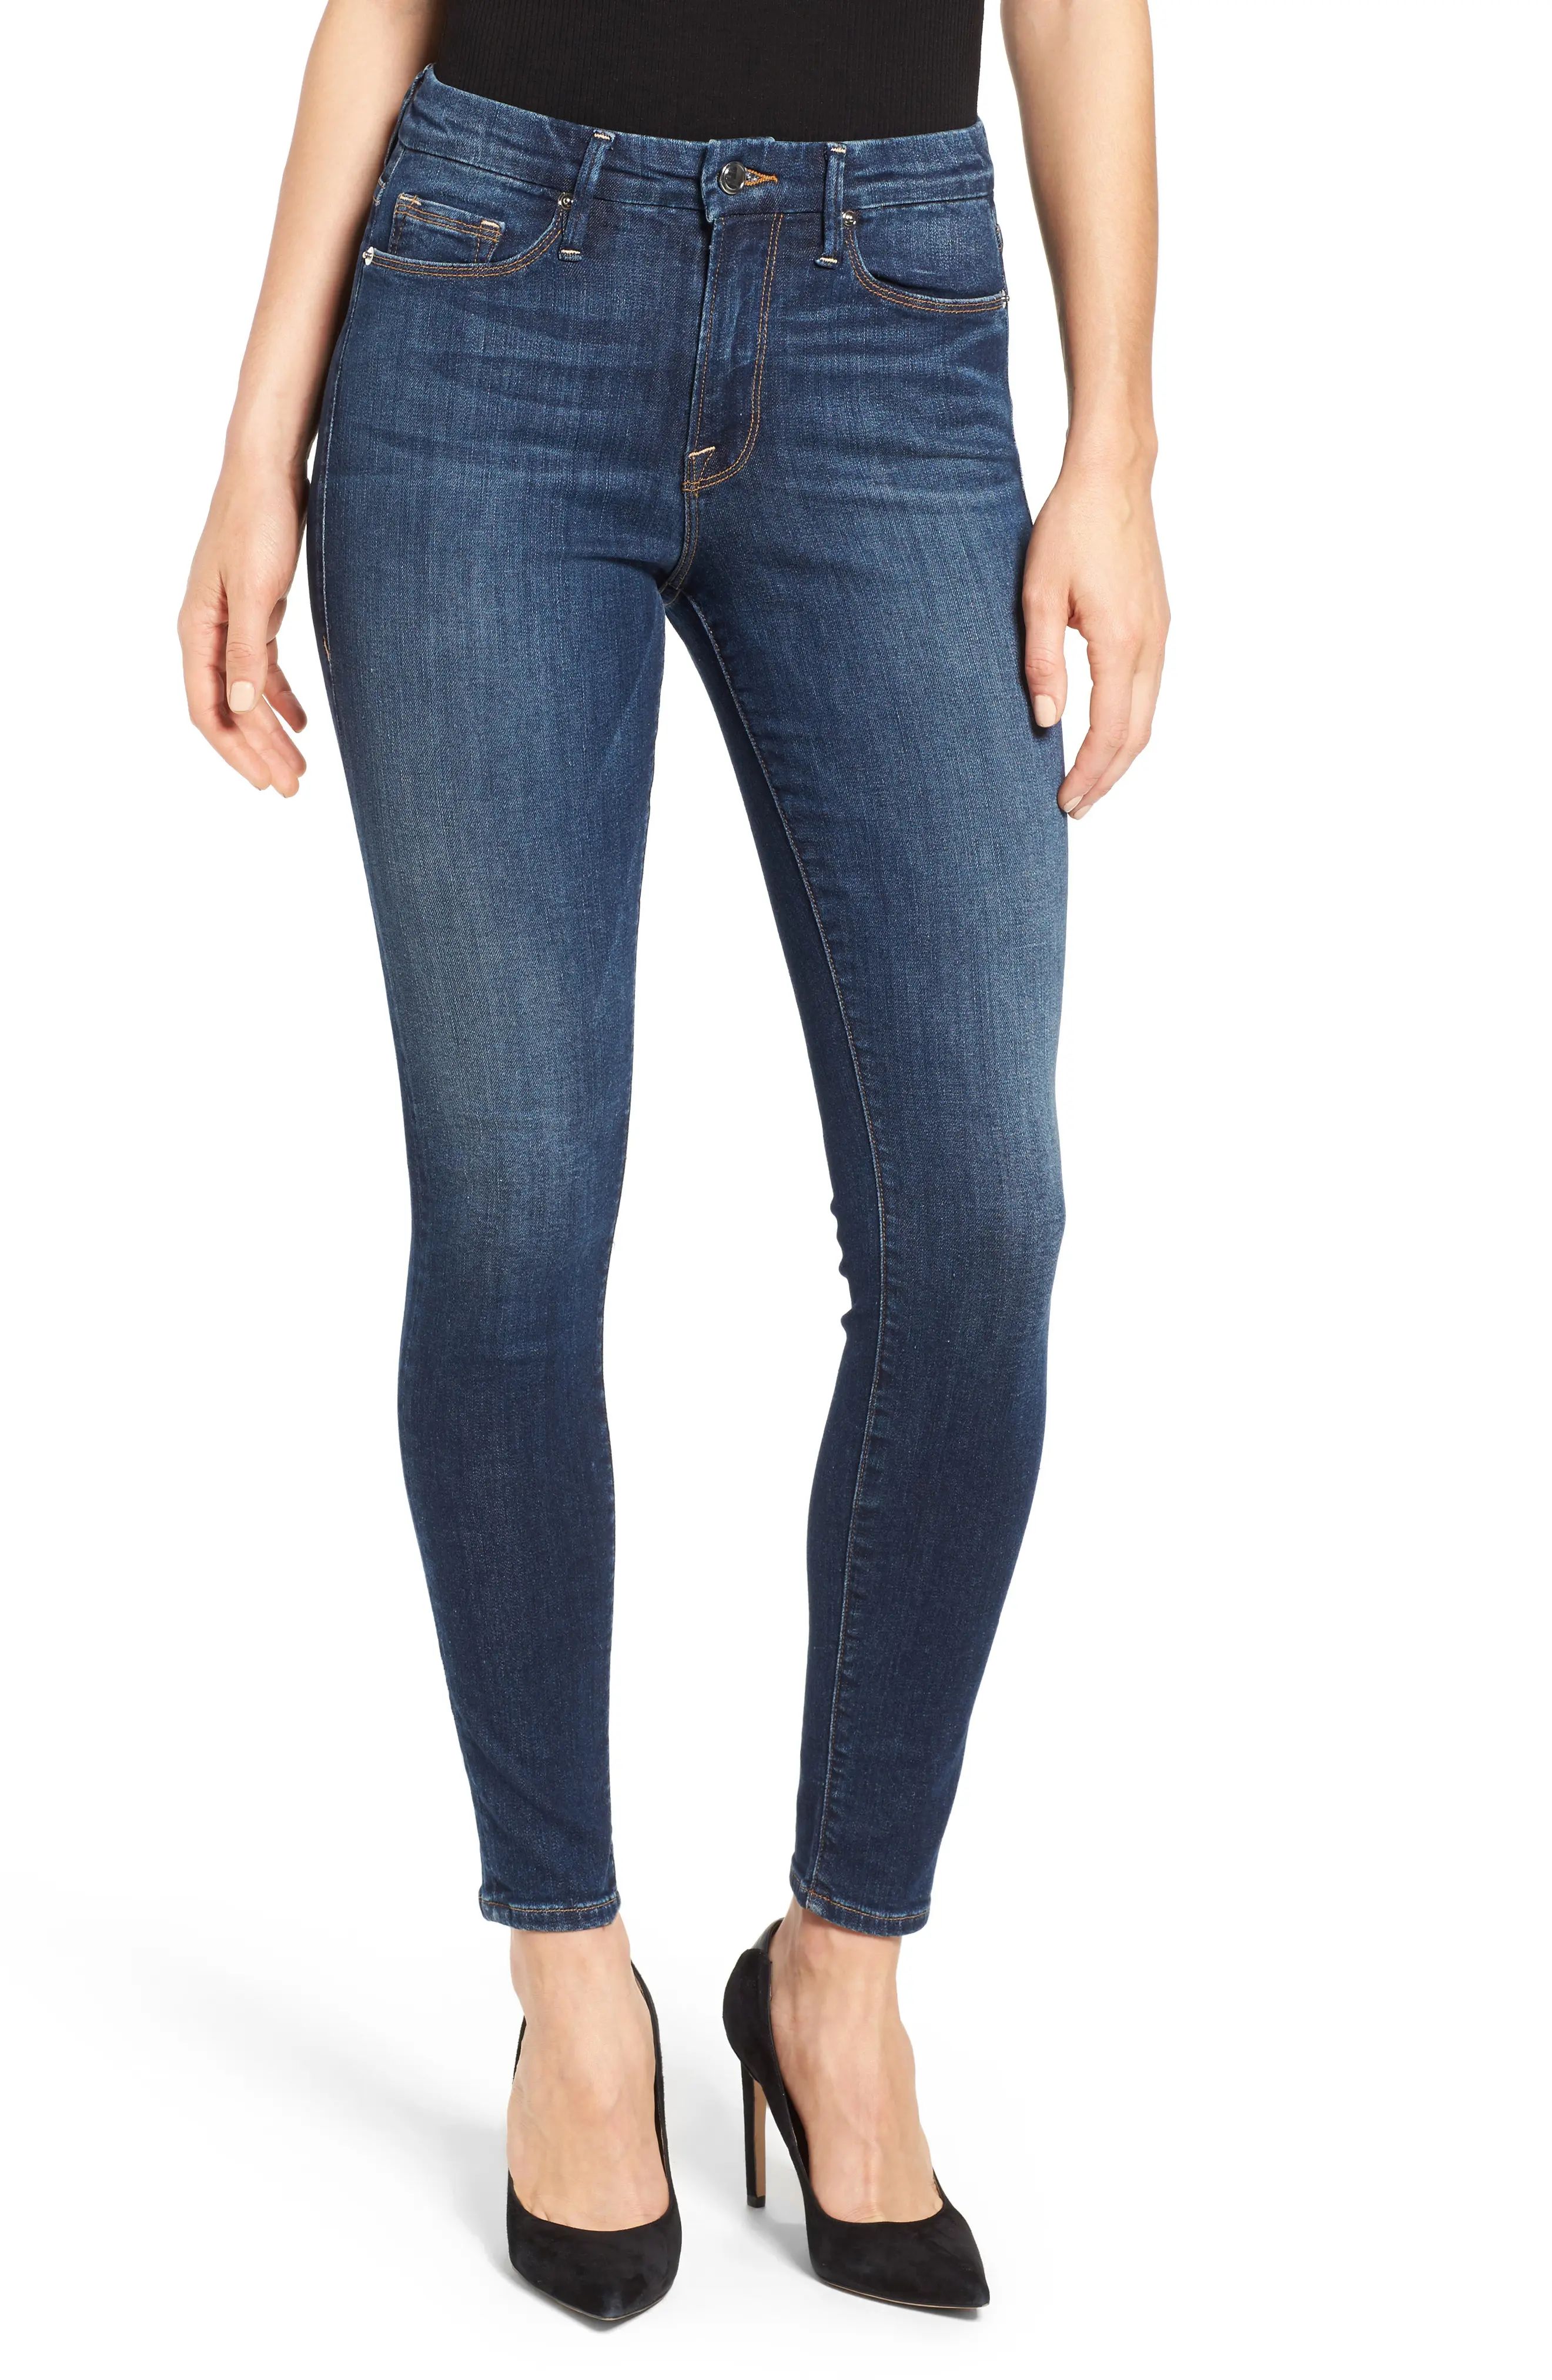 Women's Good American Good Legs High Rise Ripped Skinny Jeans, Size 0 - Blue | Nordstrom